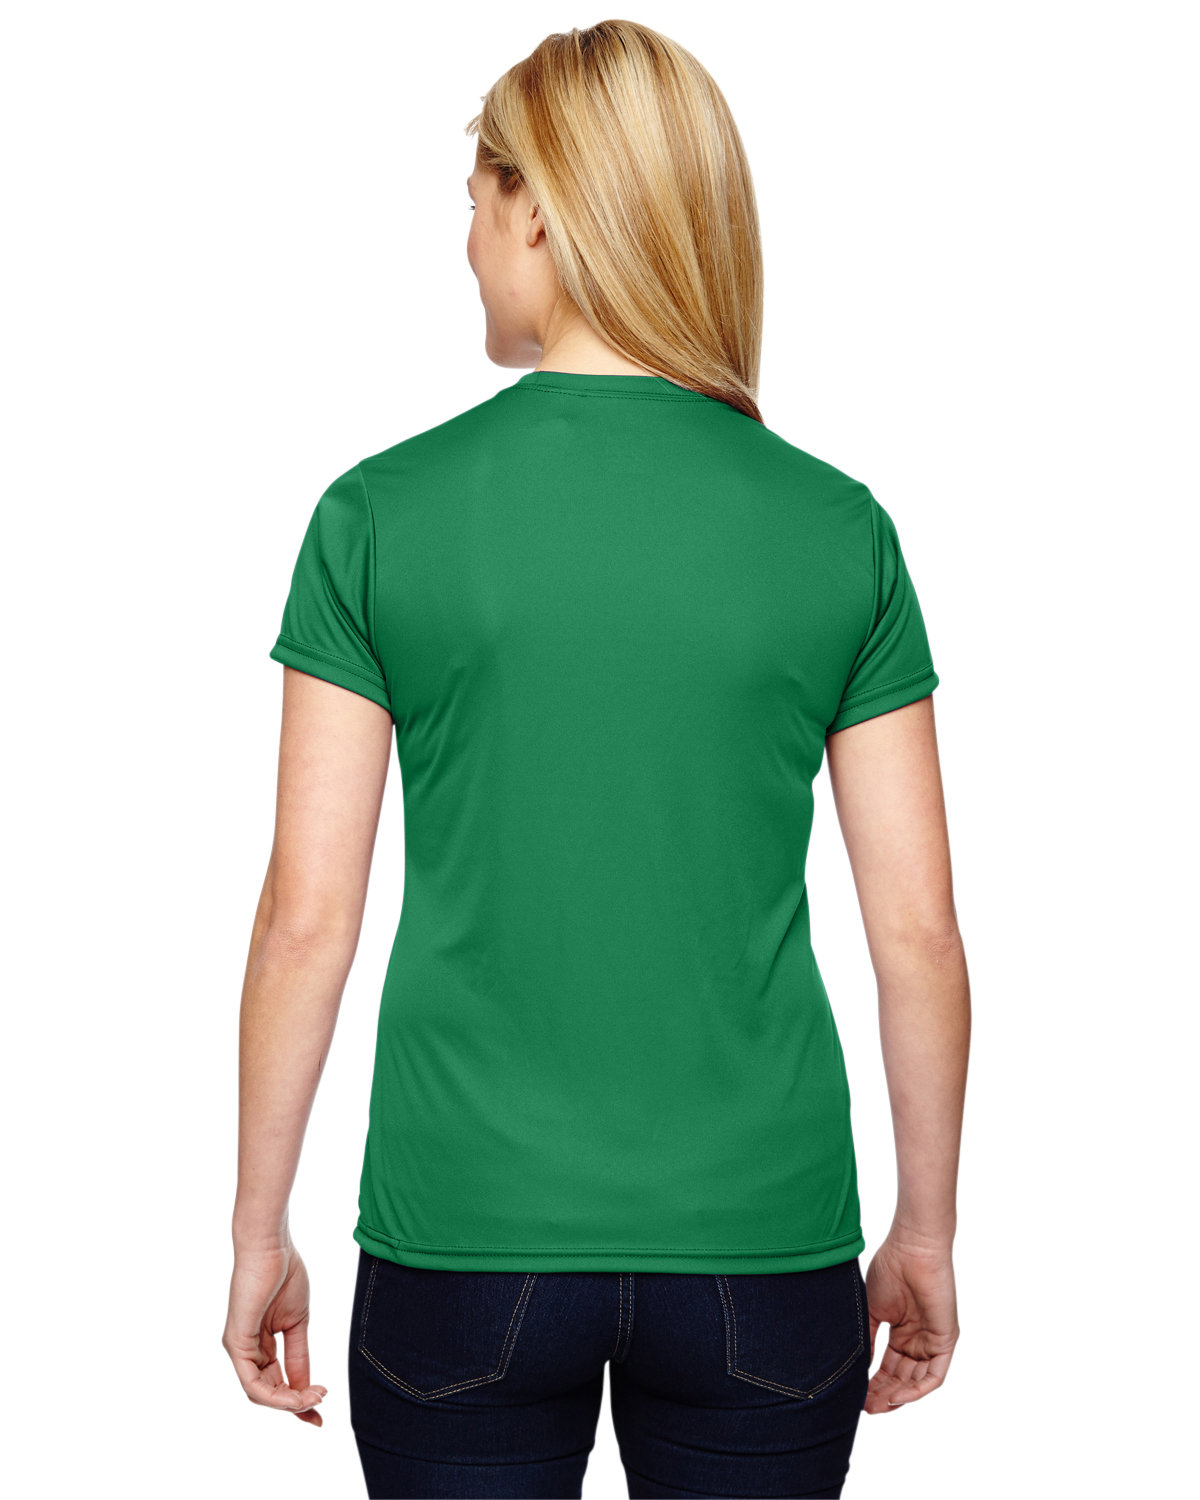 A4 Ladies' Cooling Performance T-Shirt | alphabroder